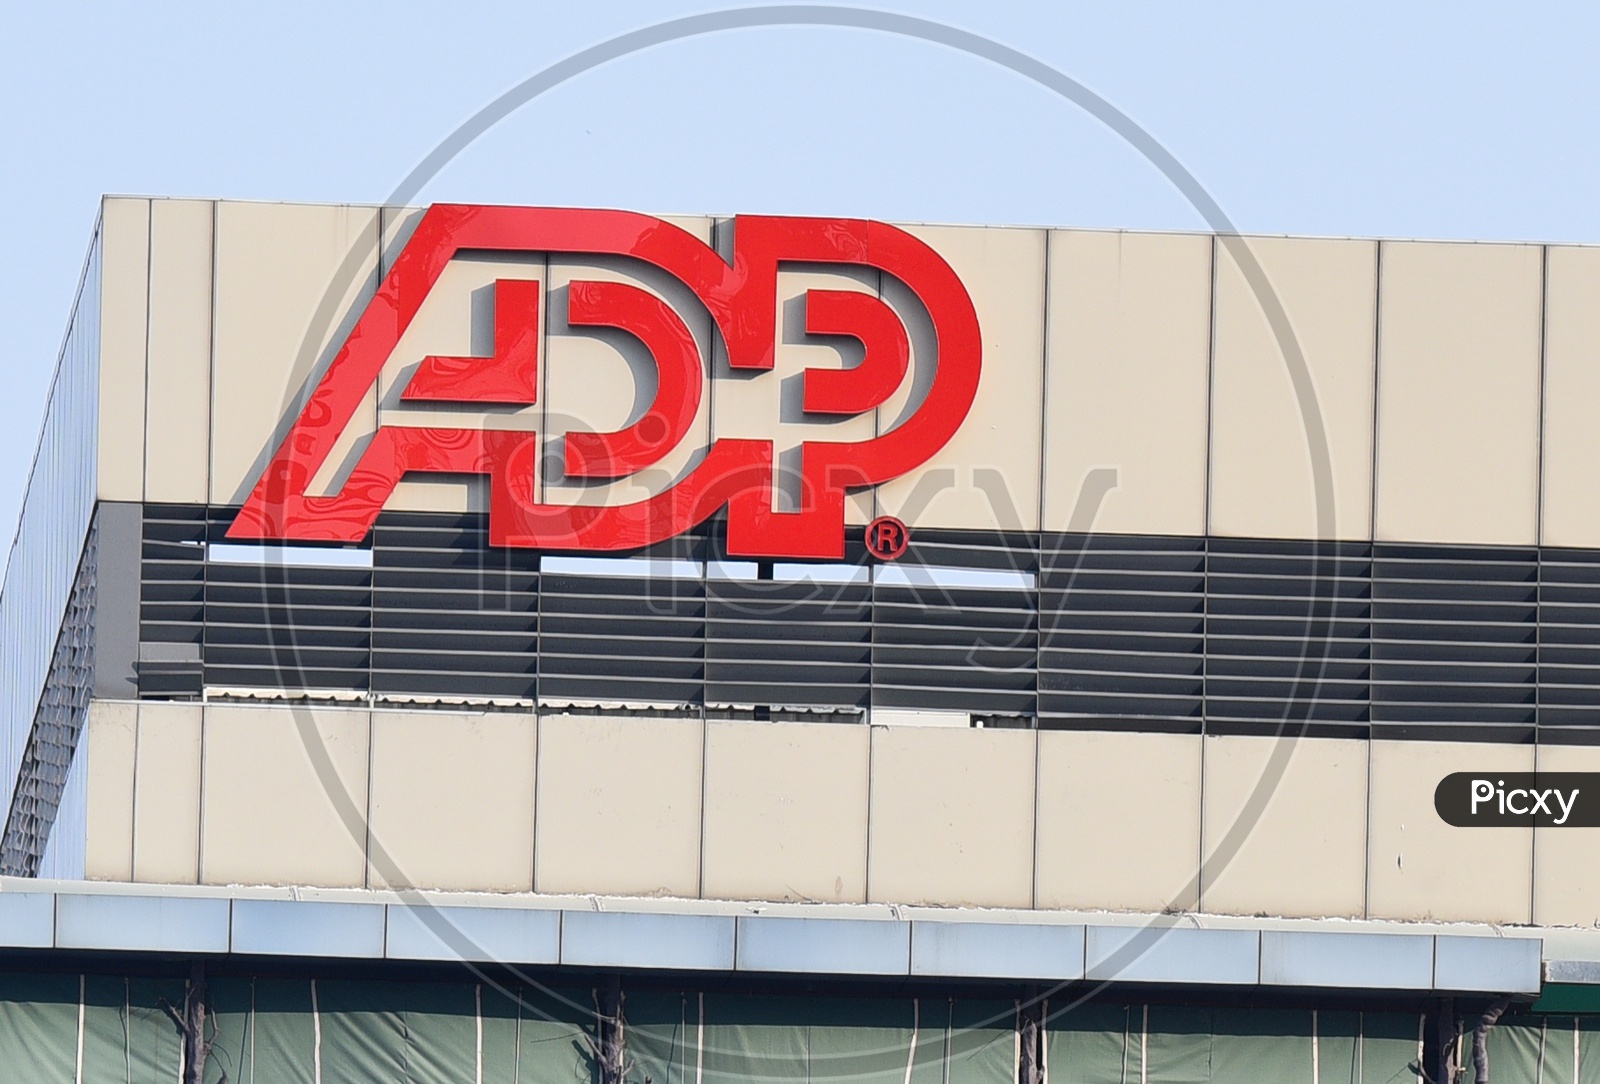 ADP  Software Company Name on Building, Hitech city, Hyderabad